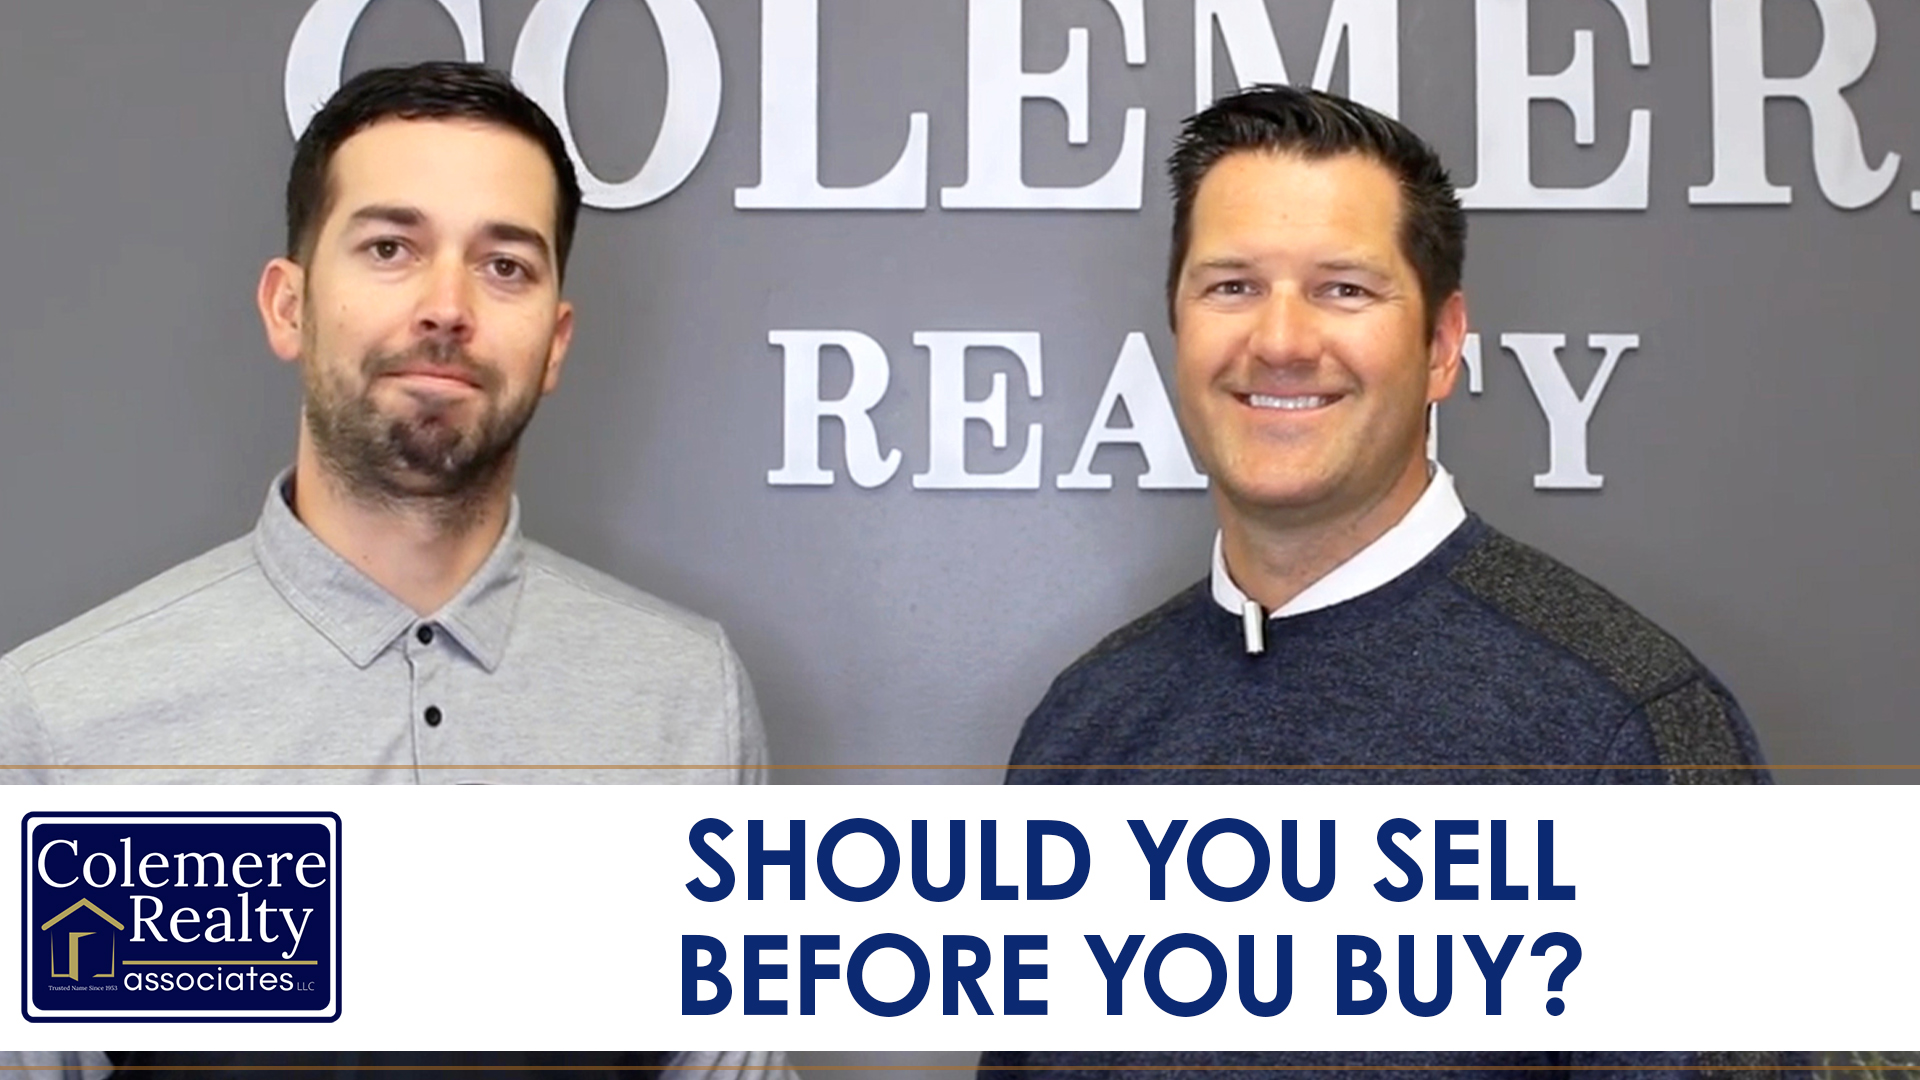 Do You Need To Sell Before You Buy?